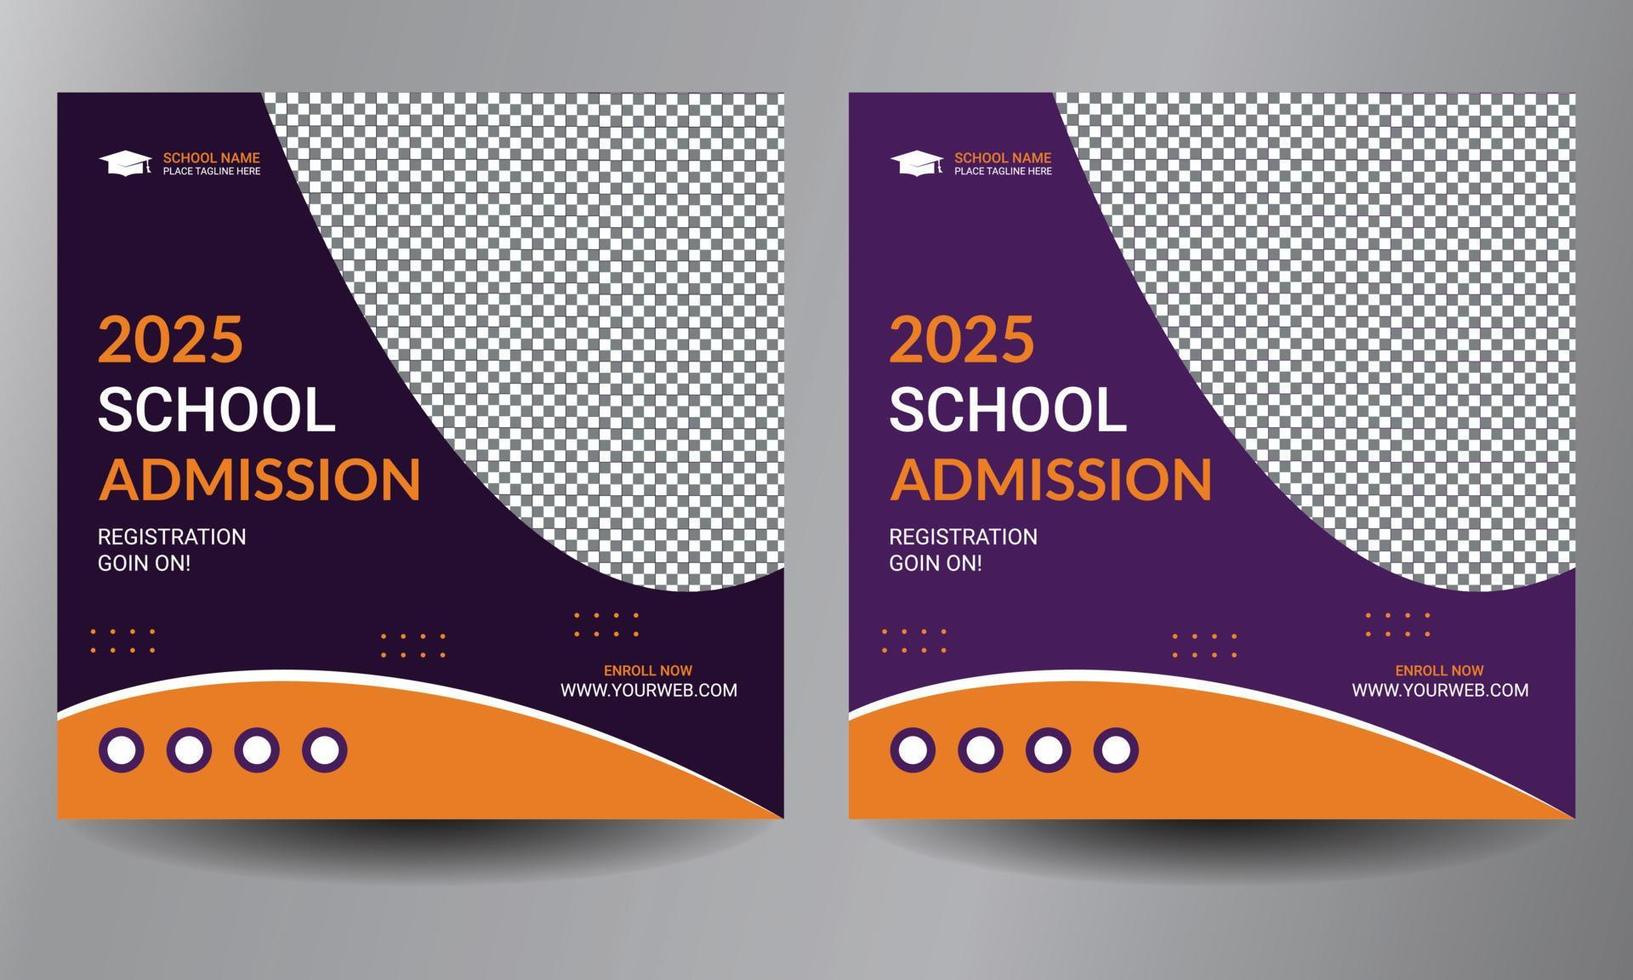 School education admission social media post and web banner template vector